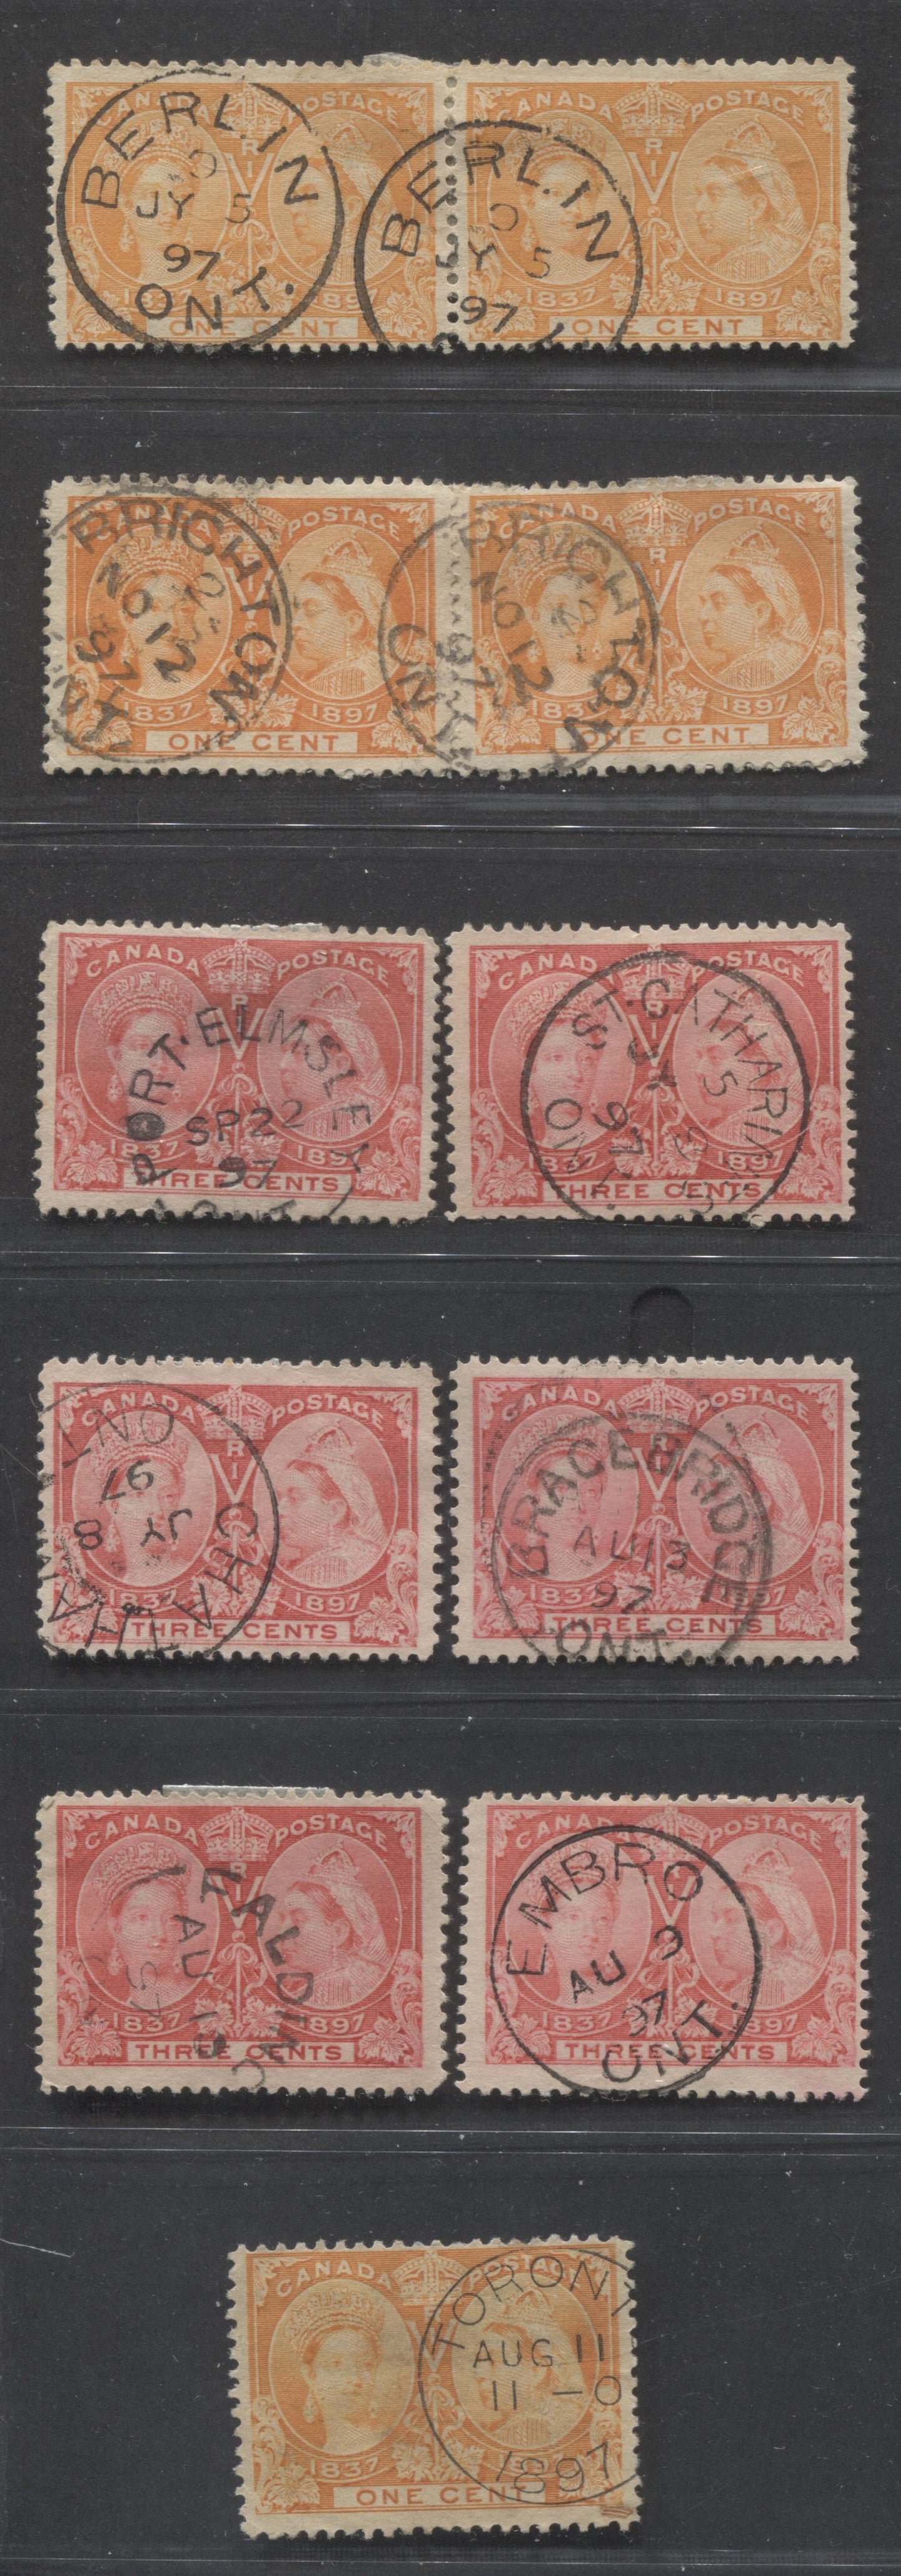 Lot 242 Canada #51, 51i, 53 1c, 3c Orange, Yellow Orange & Bright Rose Queen Victoria, 1897 Diamond Jubilee Issue, 9 Fine Used Singles & 1 Pair, With Full, Dated Strikes of CDS Town Cancels